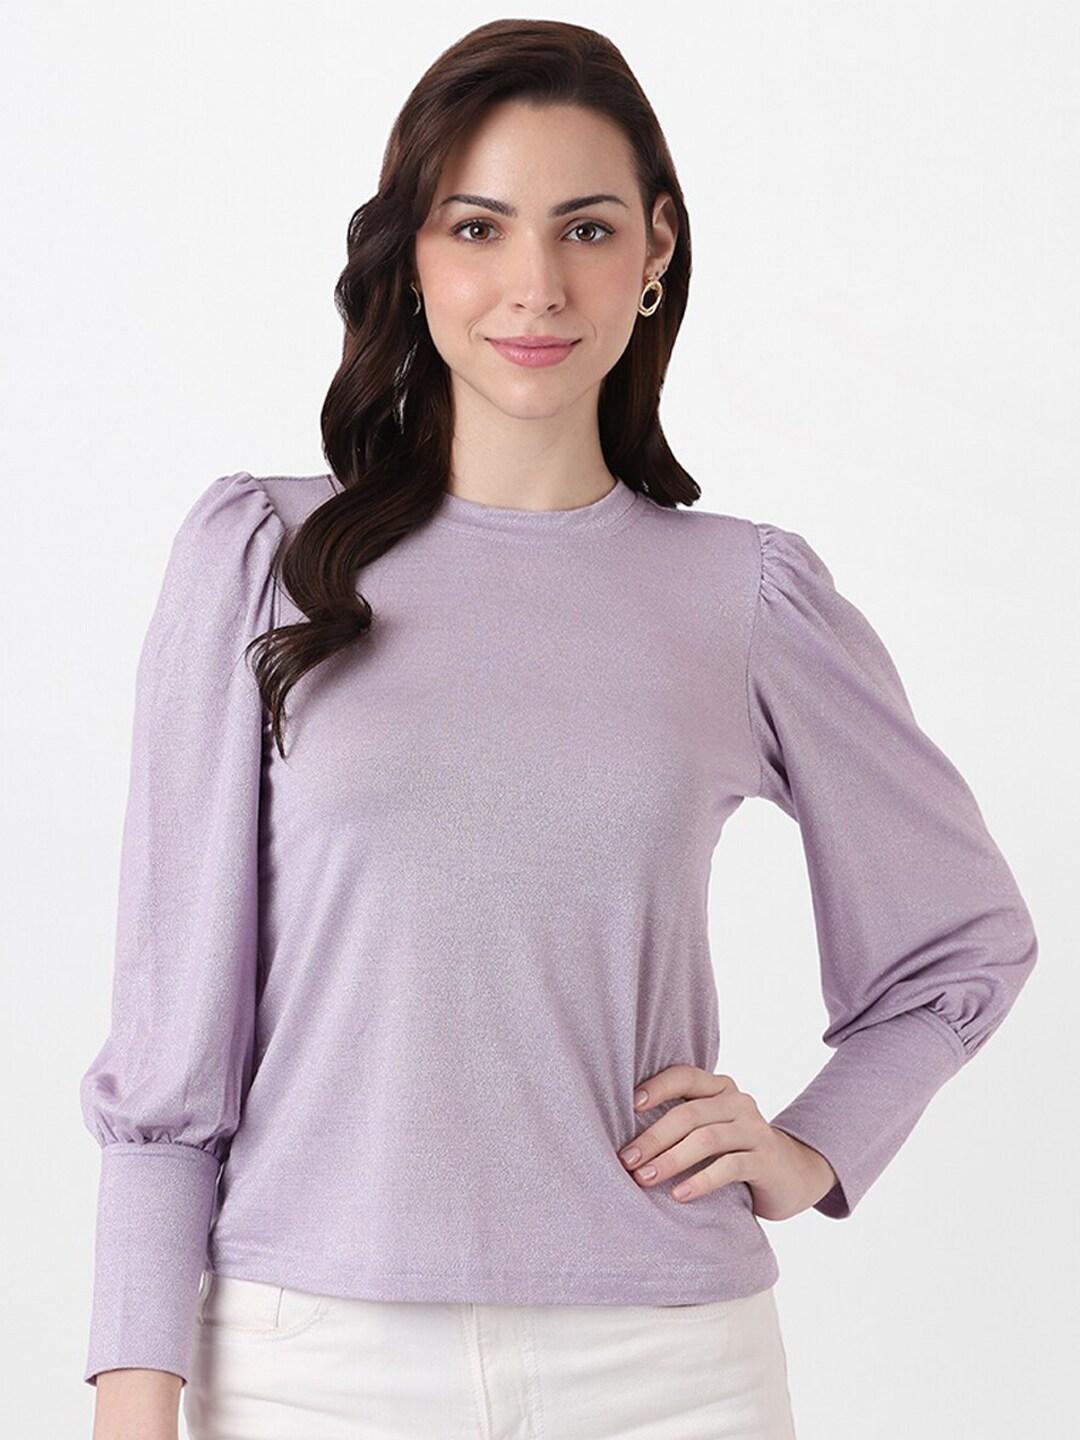 AND Lavender Solid Round Neck Long Sleeves Viscose Rayon Top